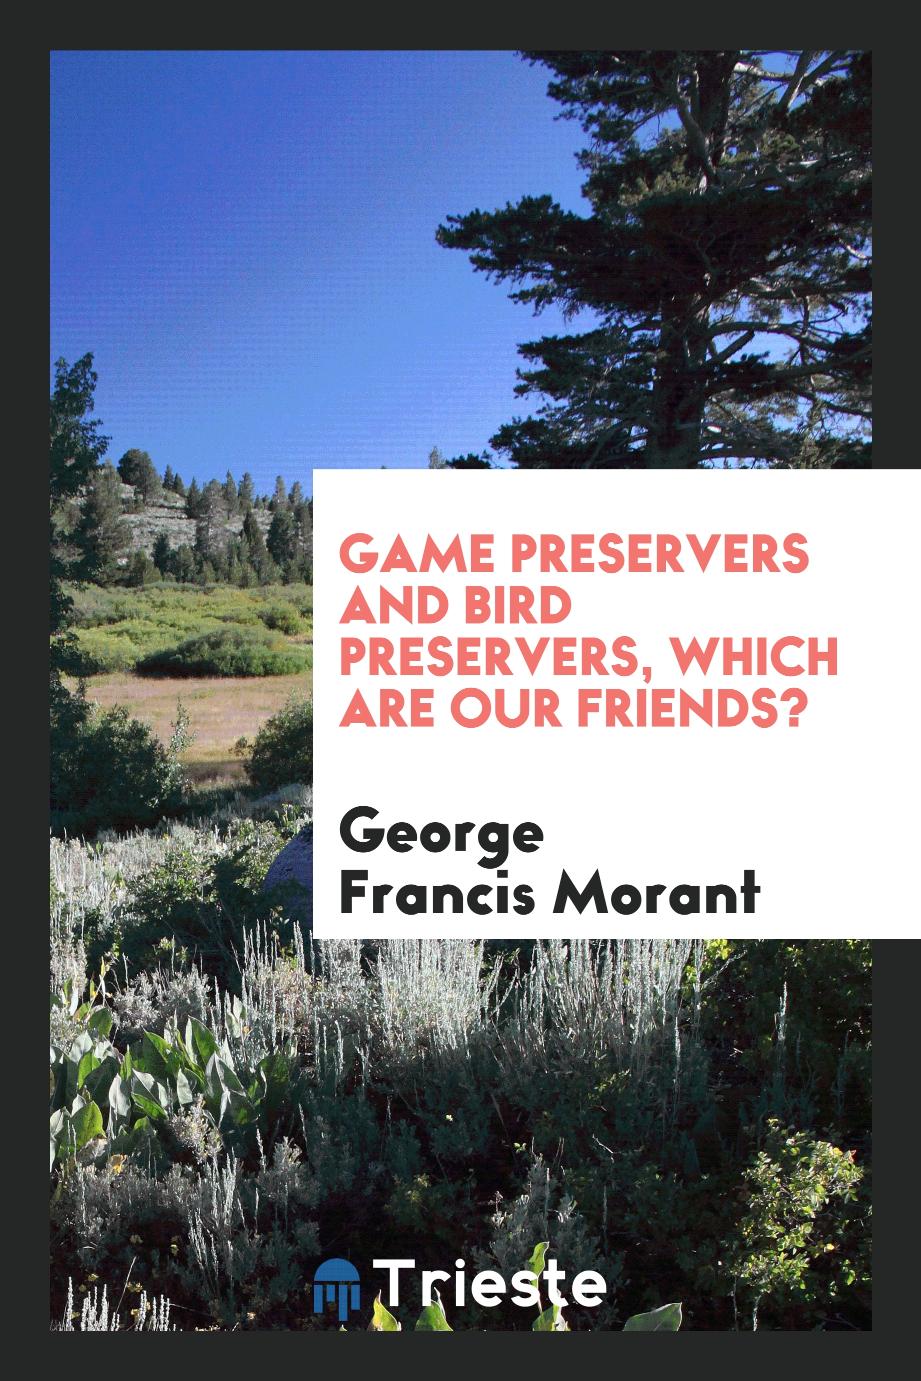 George Francis Morant - Game preservers and bird preservers, which are our friends?